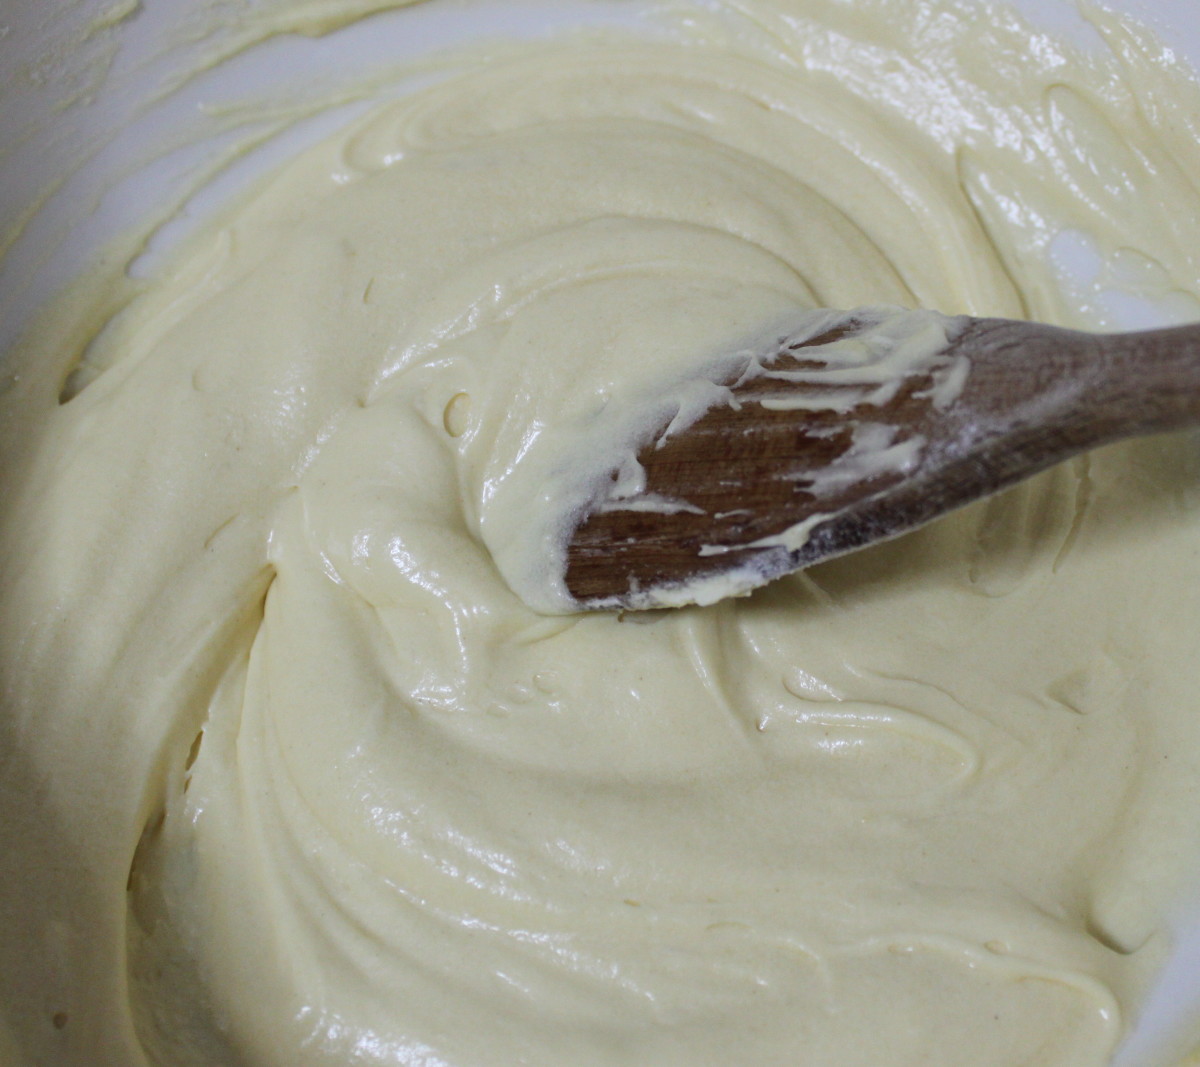 Mix well to ensure the cake mixture is combined